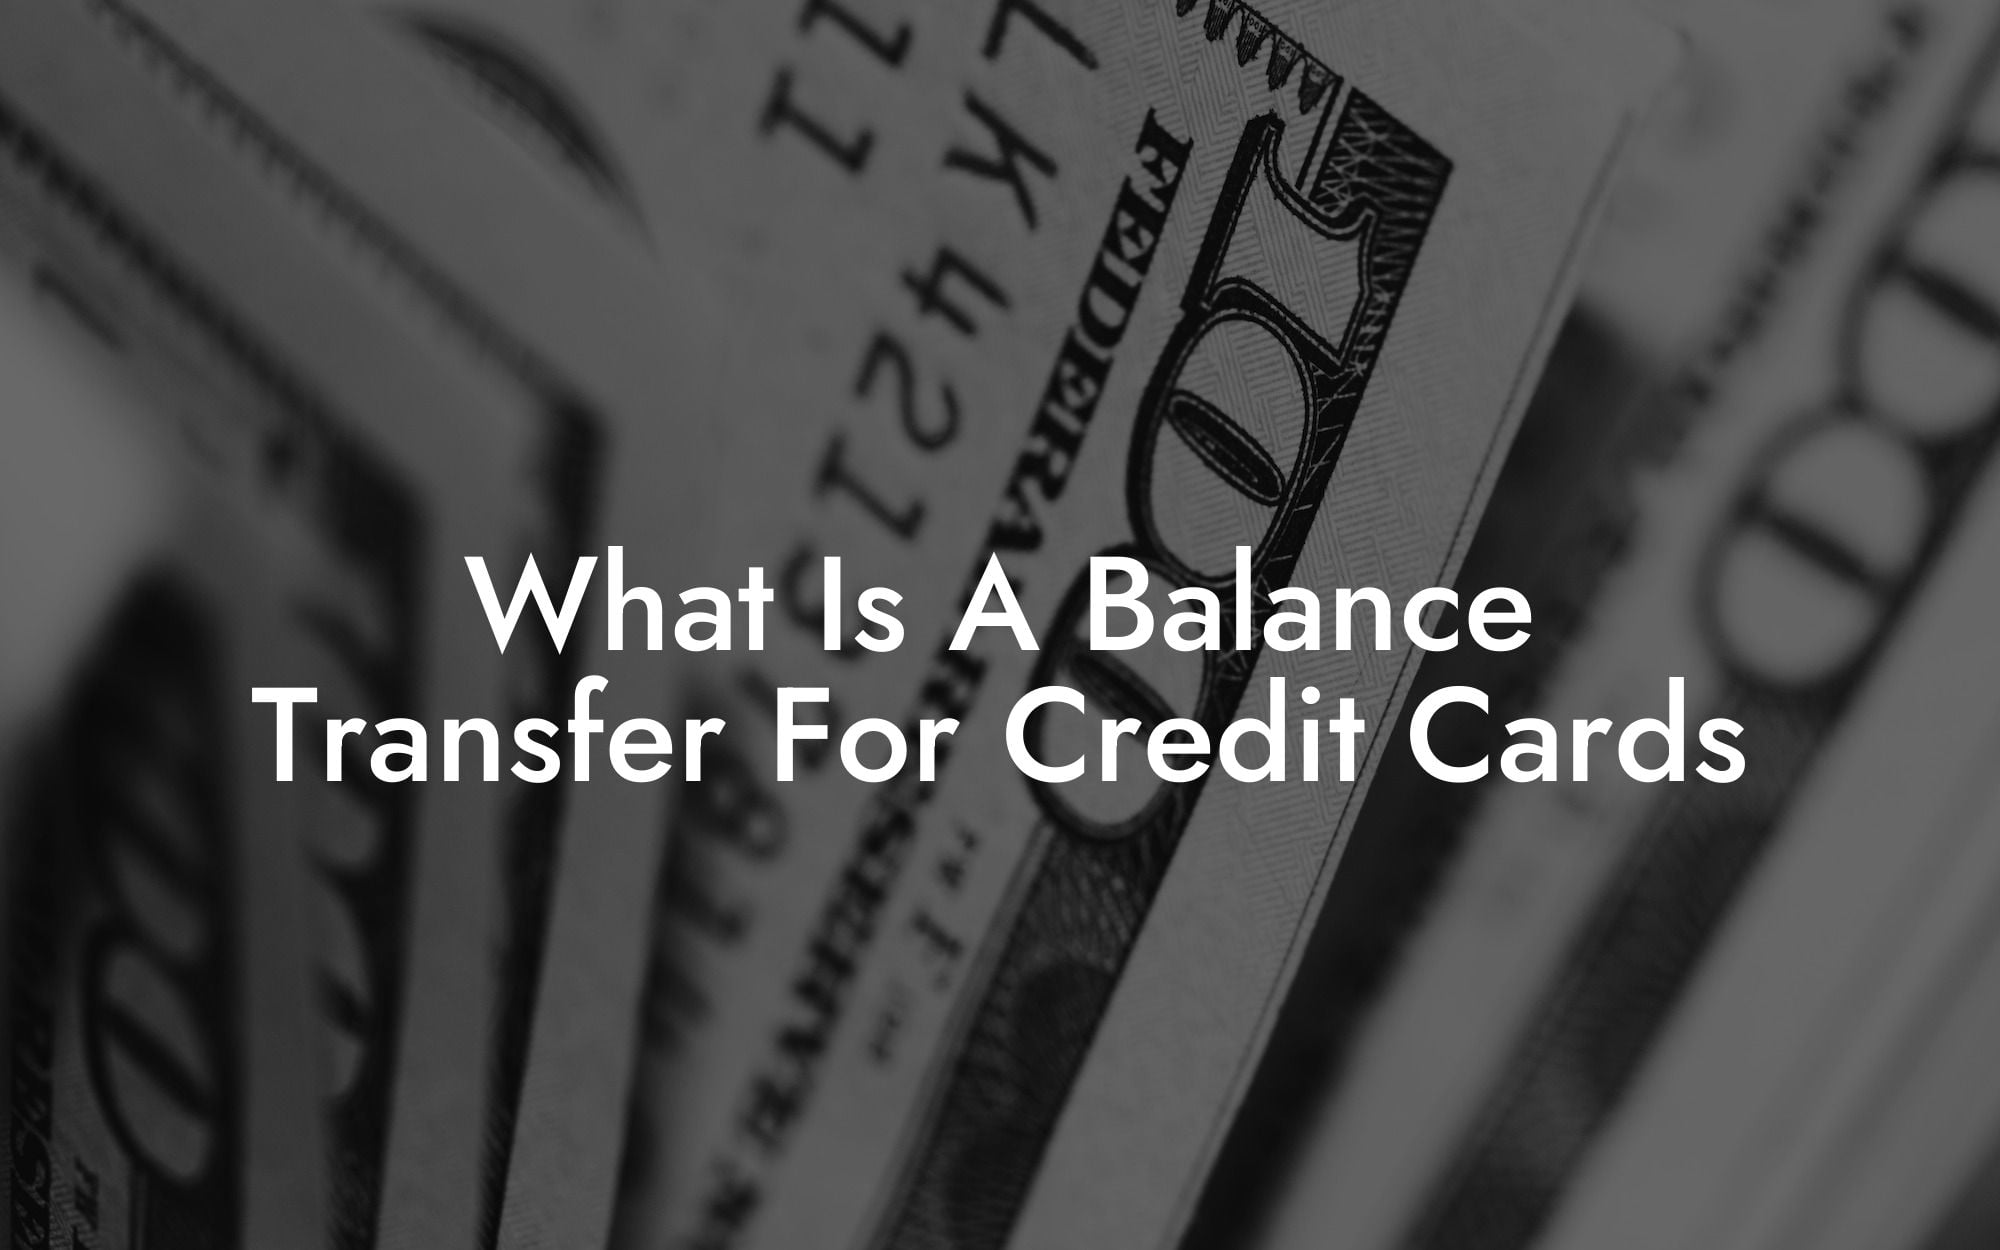 What Is A Balance Transfer For Credit Cards